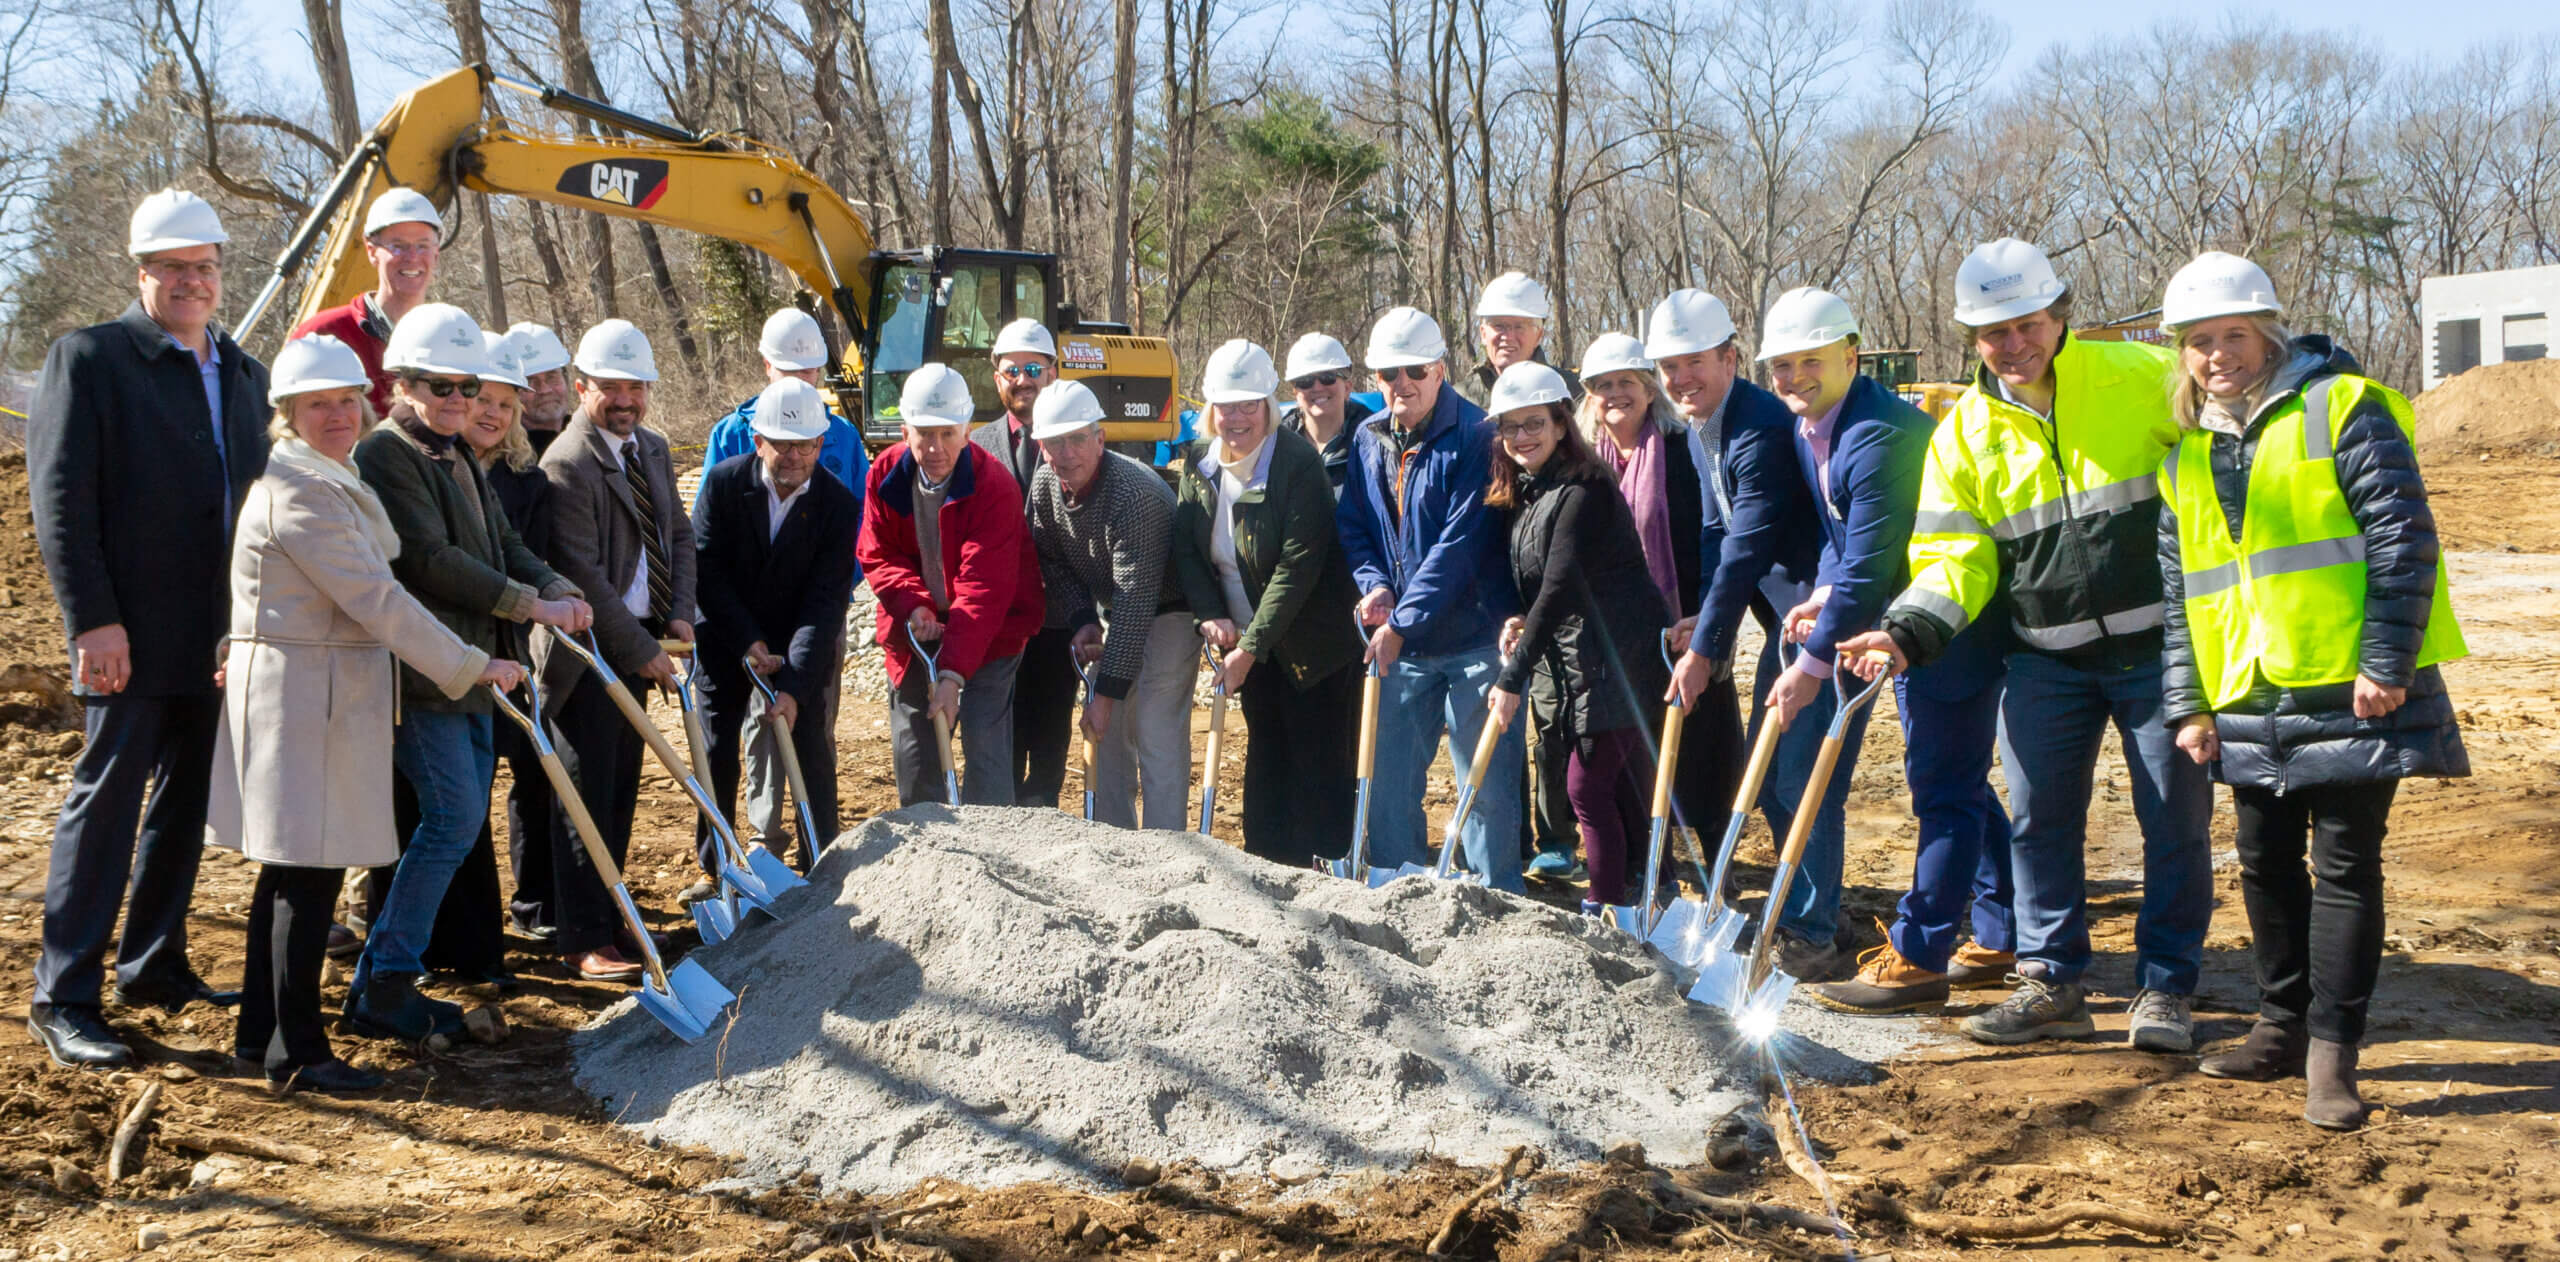 Maple Woods, A New Affordable Senior Housing Community, Underway with Project Team Harborlight Homes, Windover Construction, and SV Design